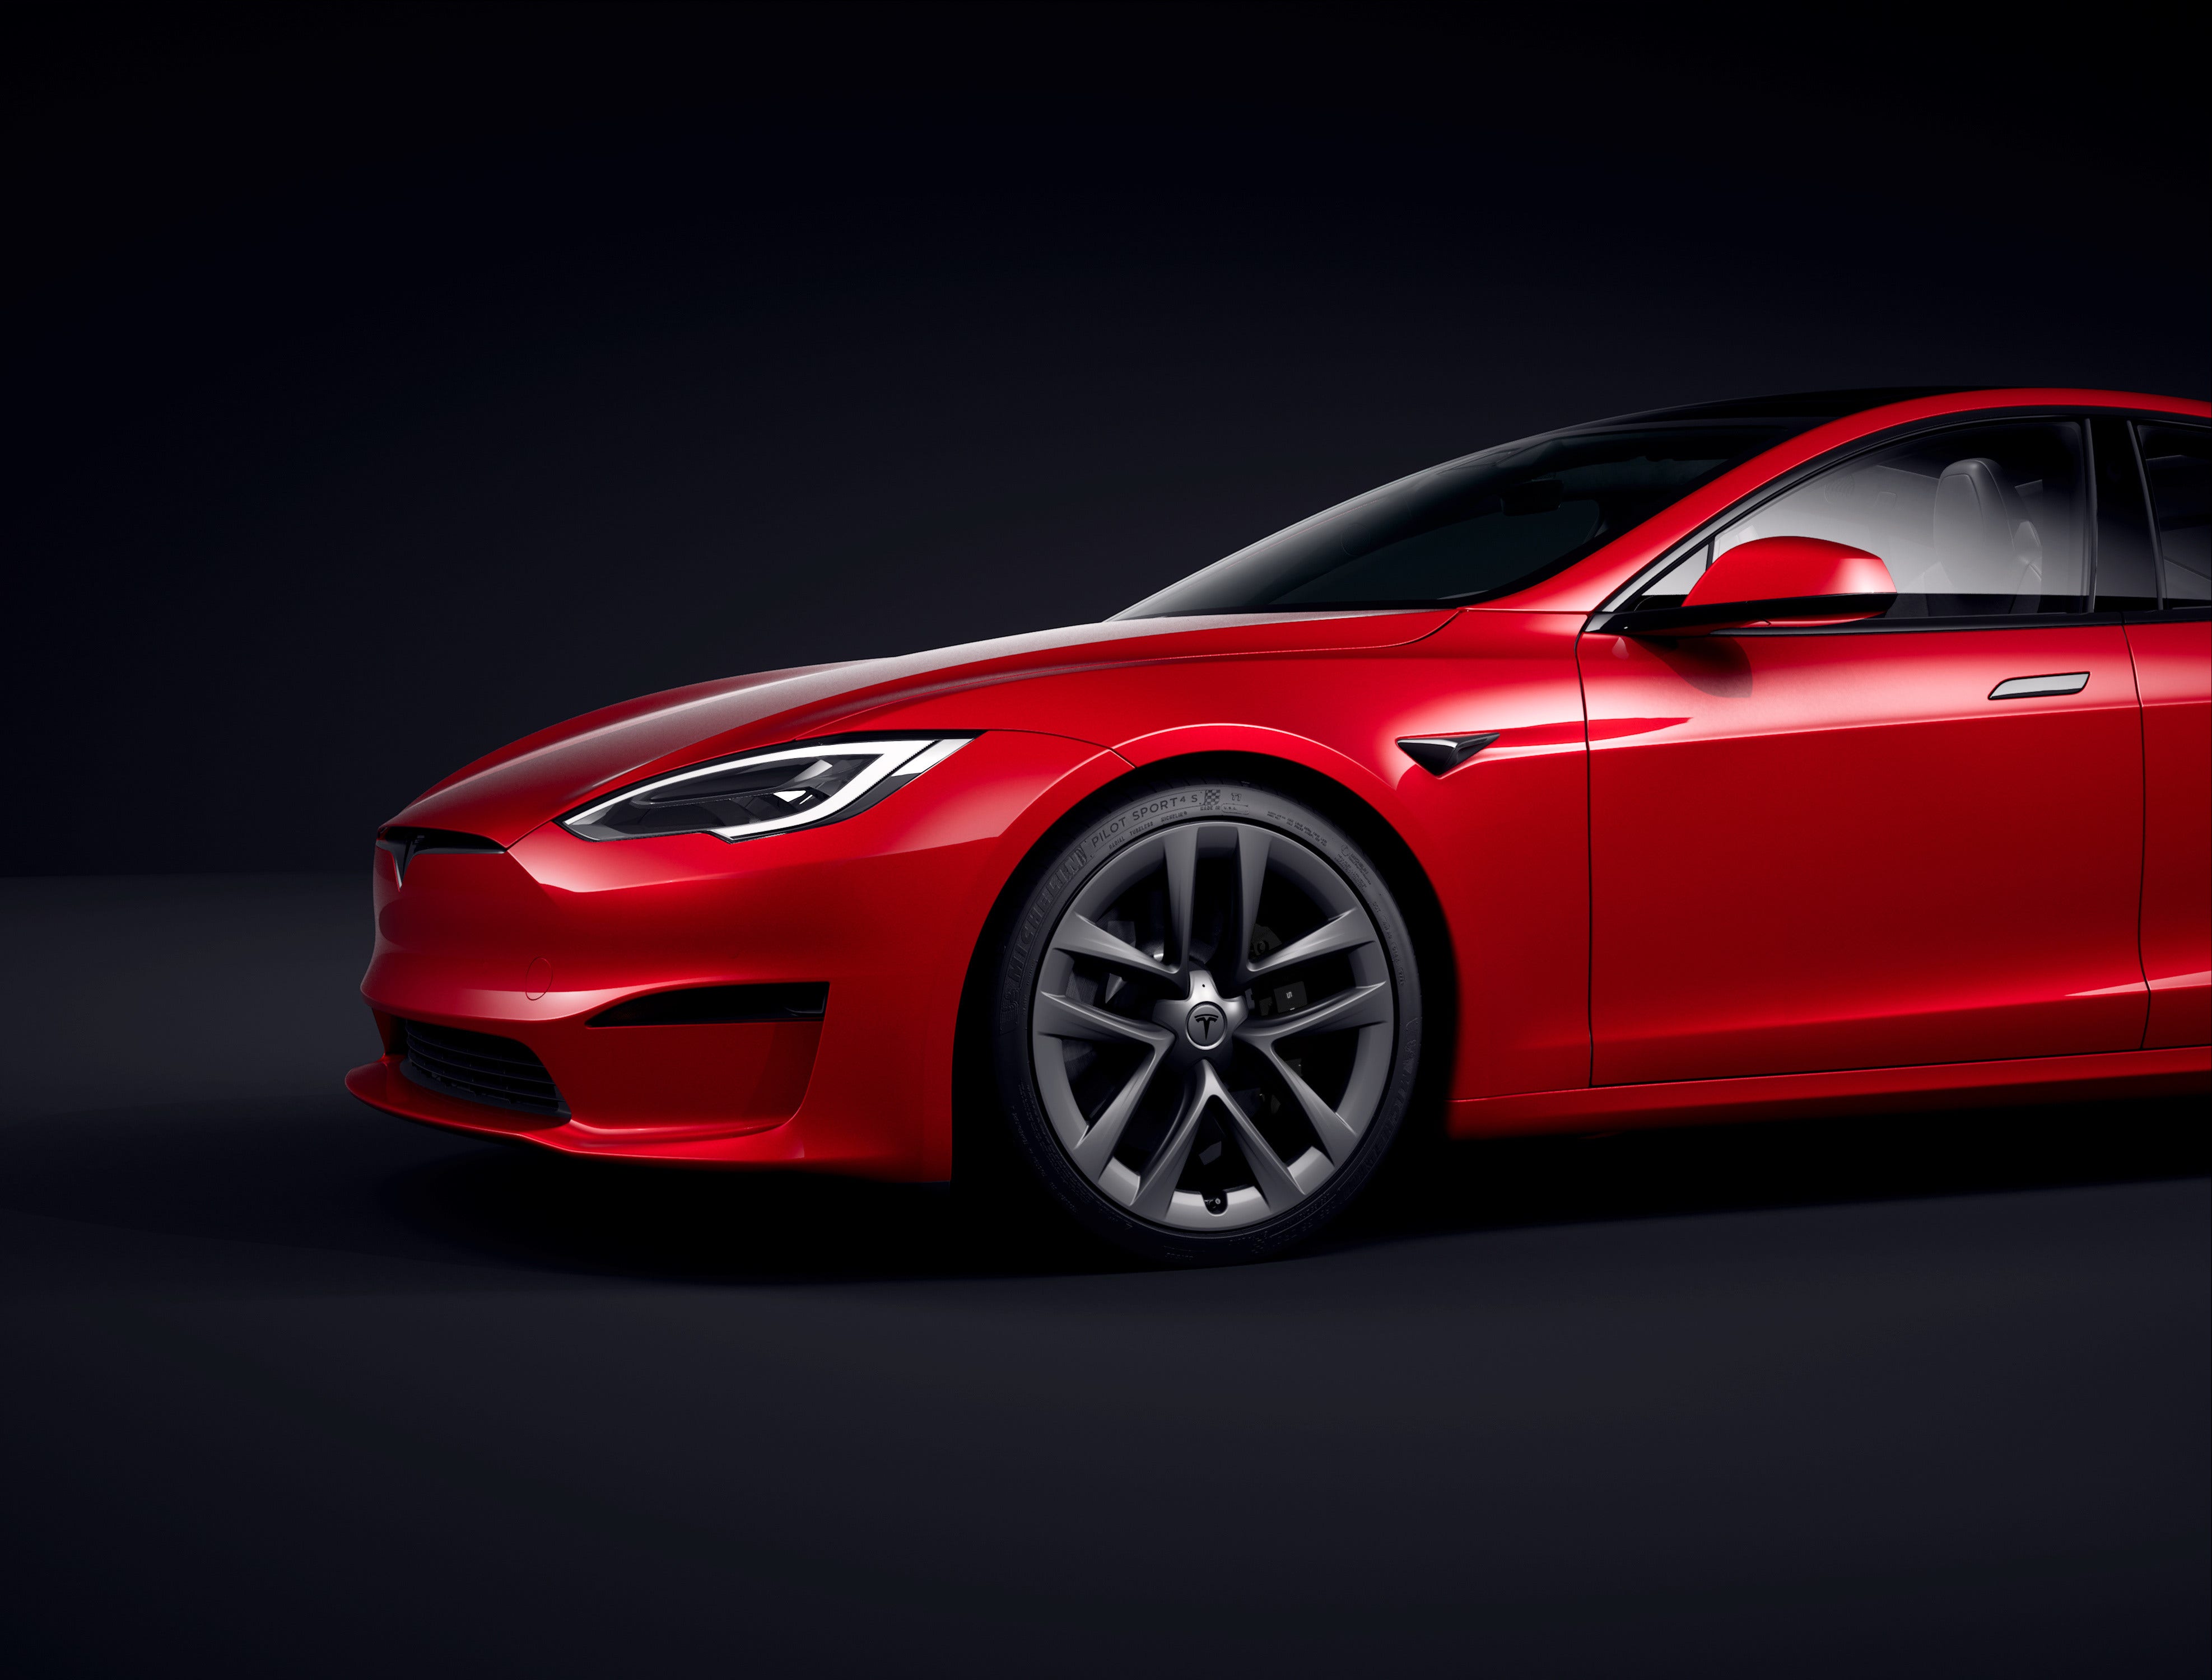 Company That Assembles The iPhone Hopes To Eventually Make Tesla Cars